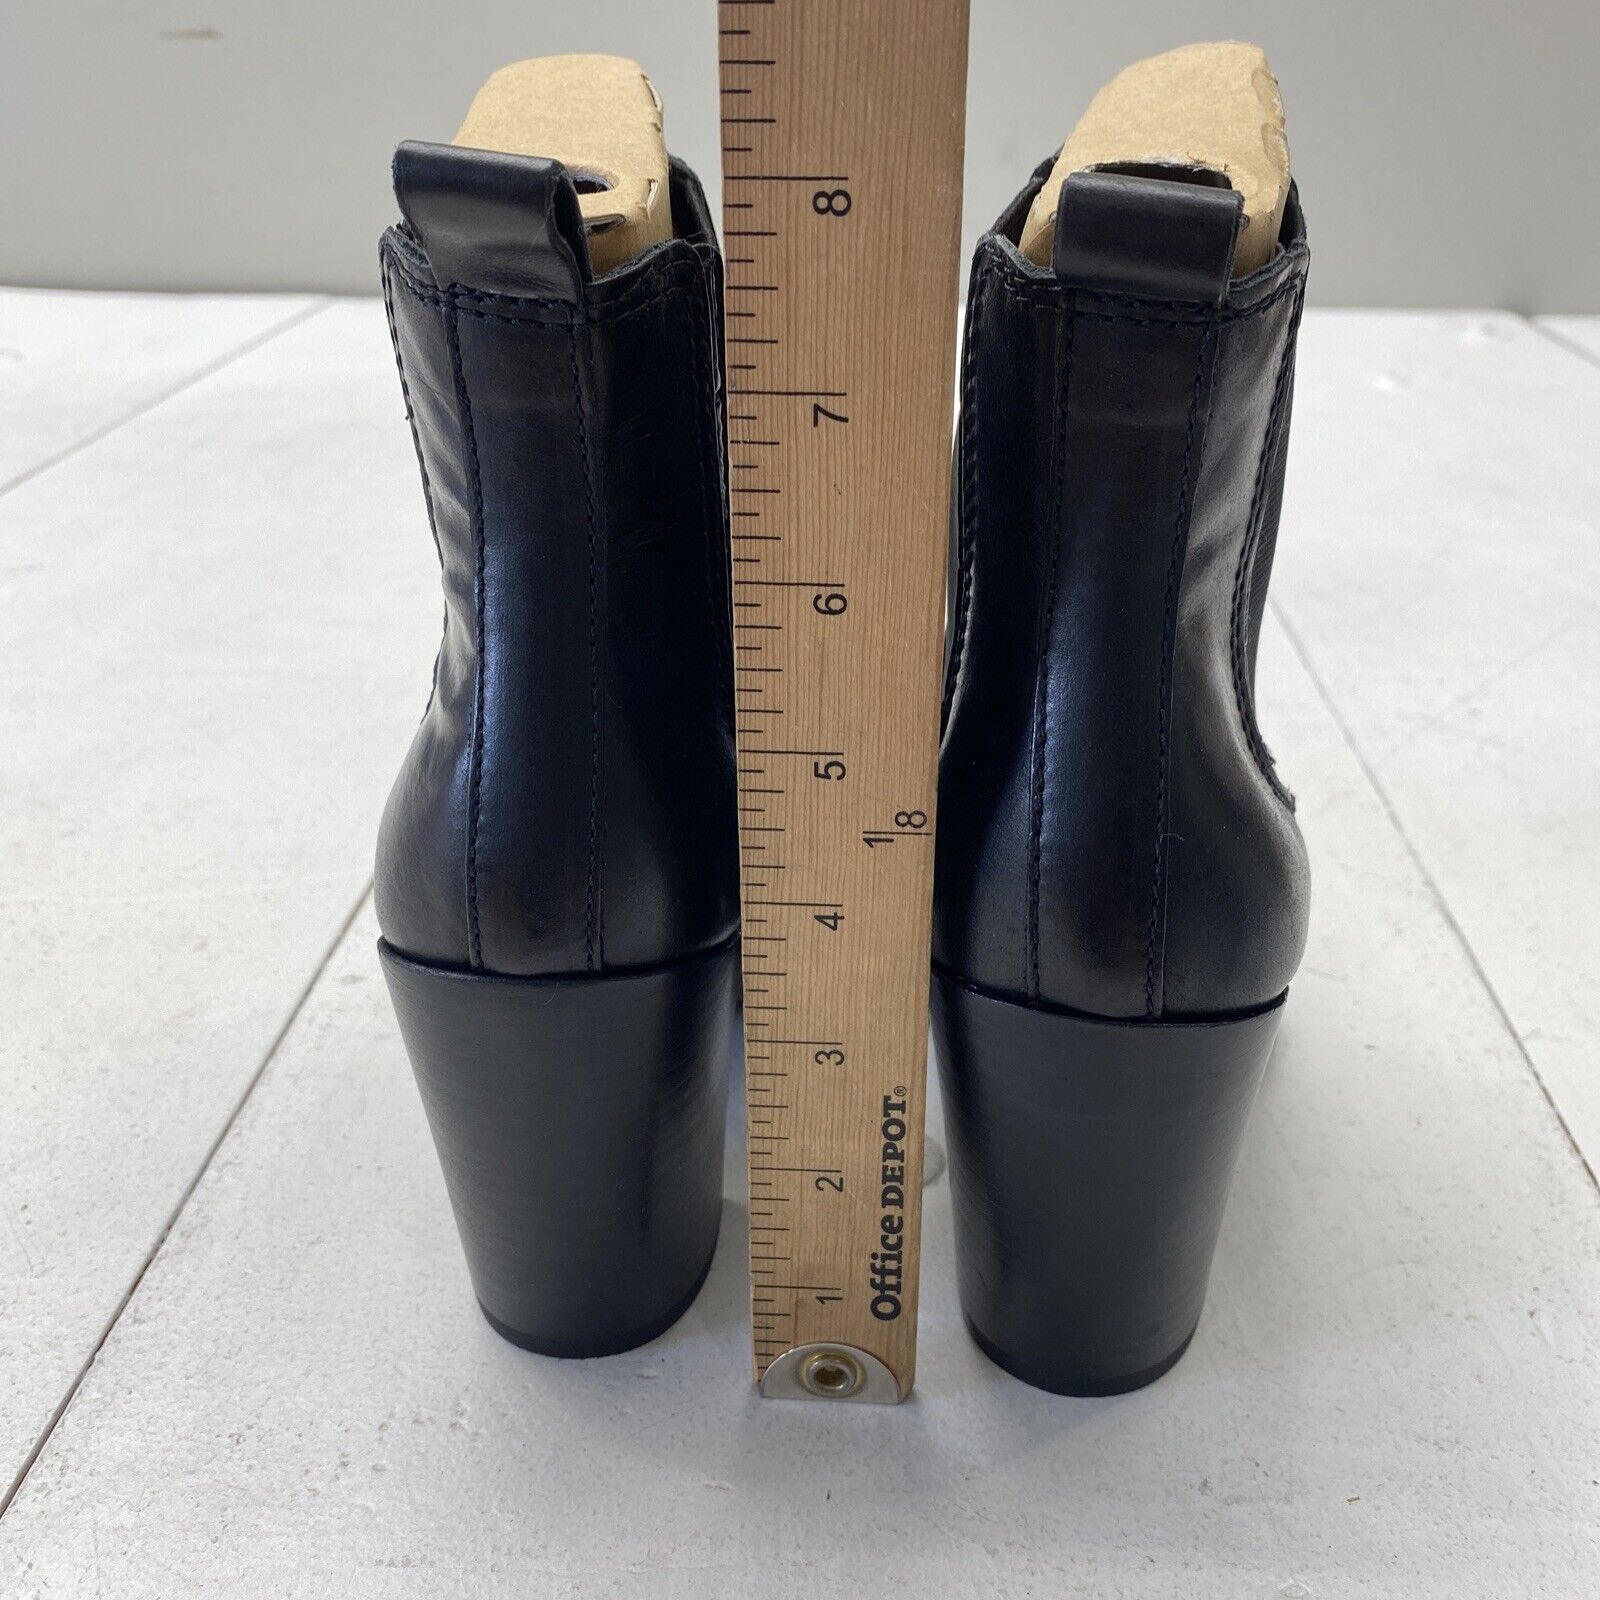 Ladies - Black Leather Boots with Heel - Size: 8 - H&M